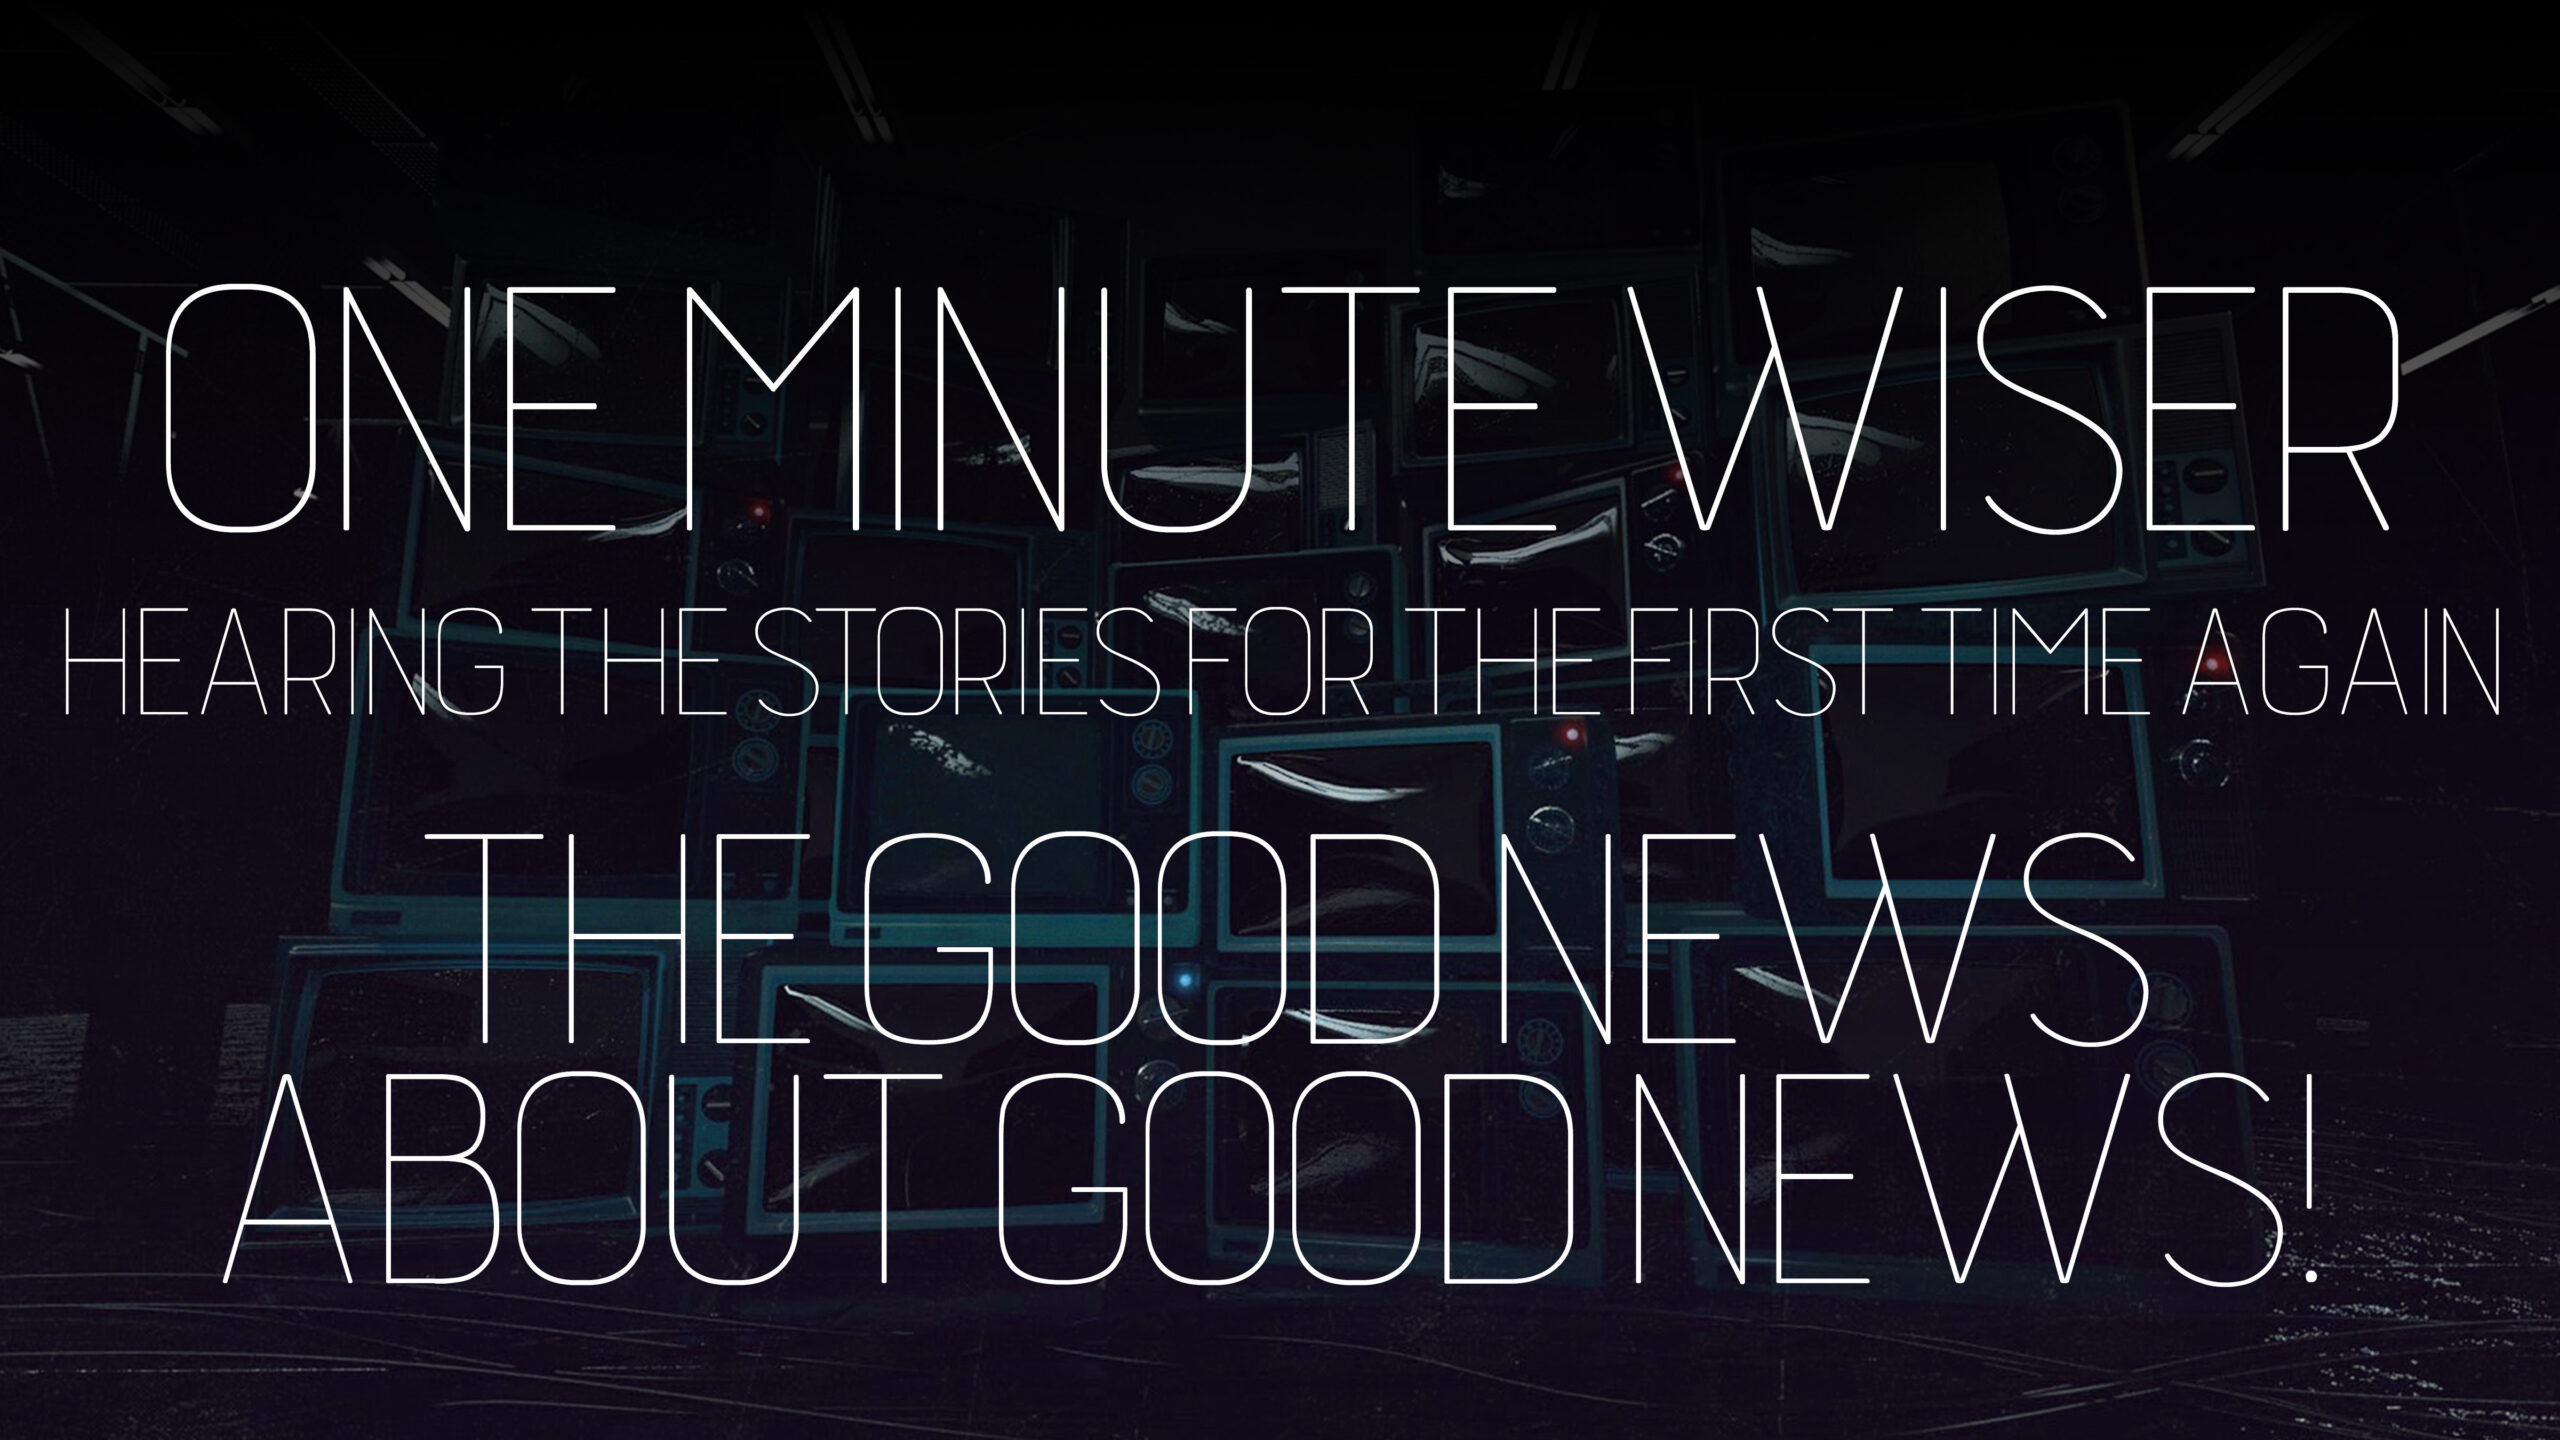 One Minute Wiser Part 6 "Good News About Good News!" (THRIVE)